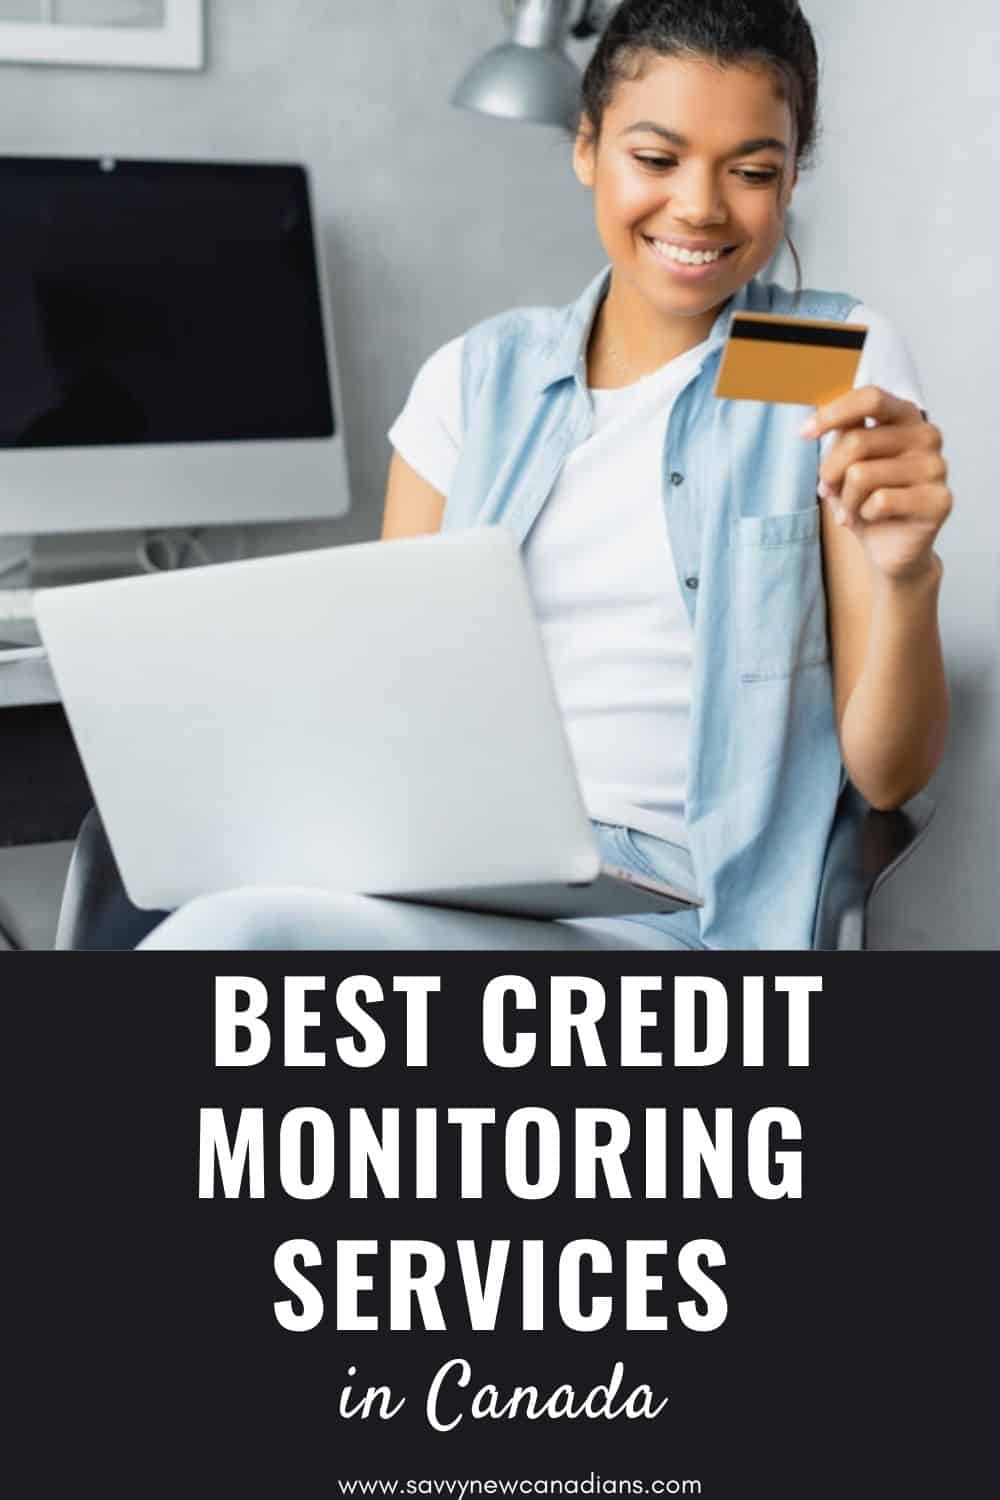 Best Credit Monitoring Services in Canada 2022